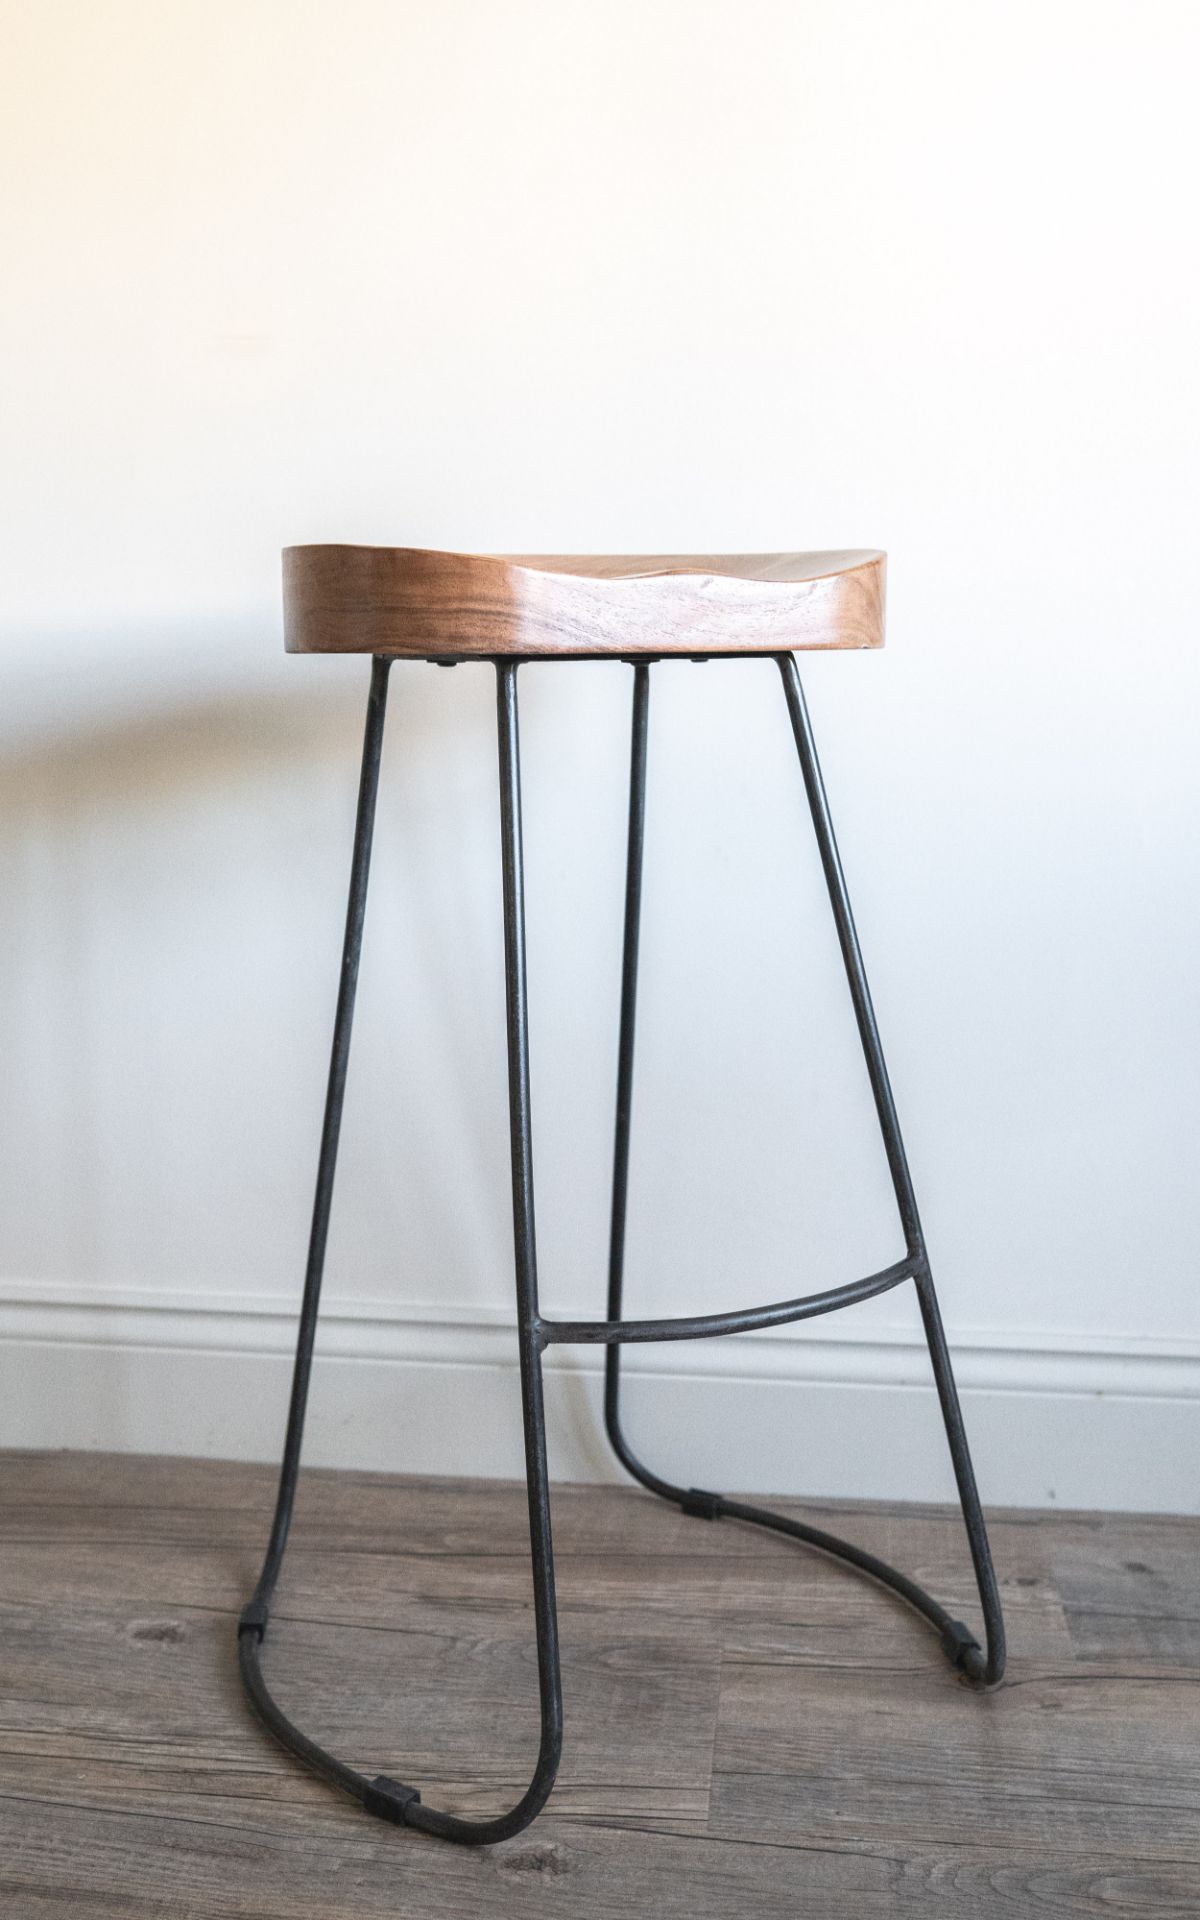 2 x Tall Dark Wood and Iron Stool: A gorgeous high bar stool with an ergonomic seat.